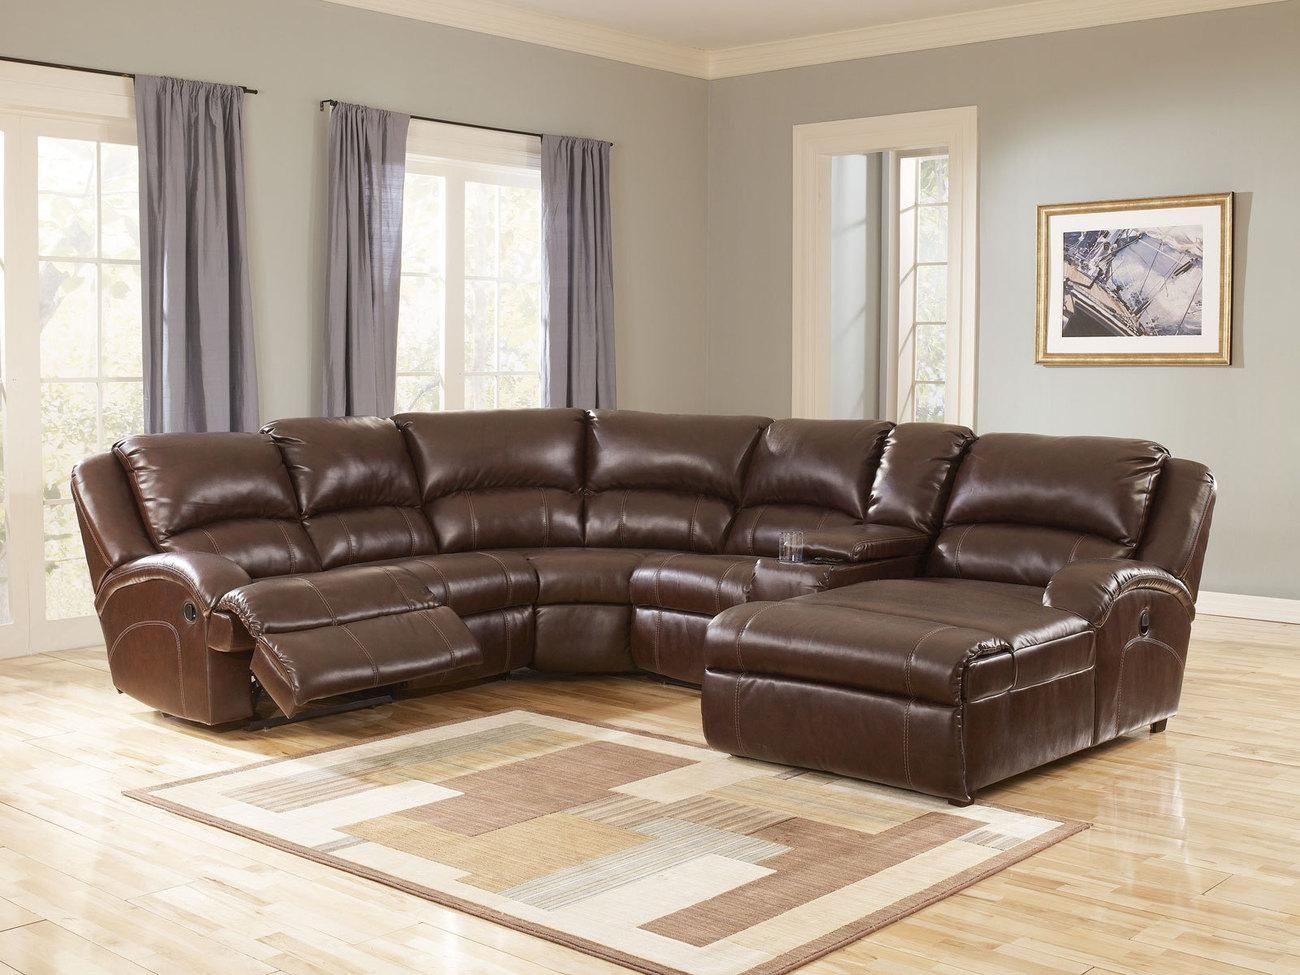 Epic Sectional Sleeper Sofa With Recliners 17 With Additional With Slumberland Couches (View 7 of 20)